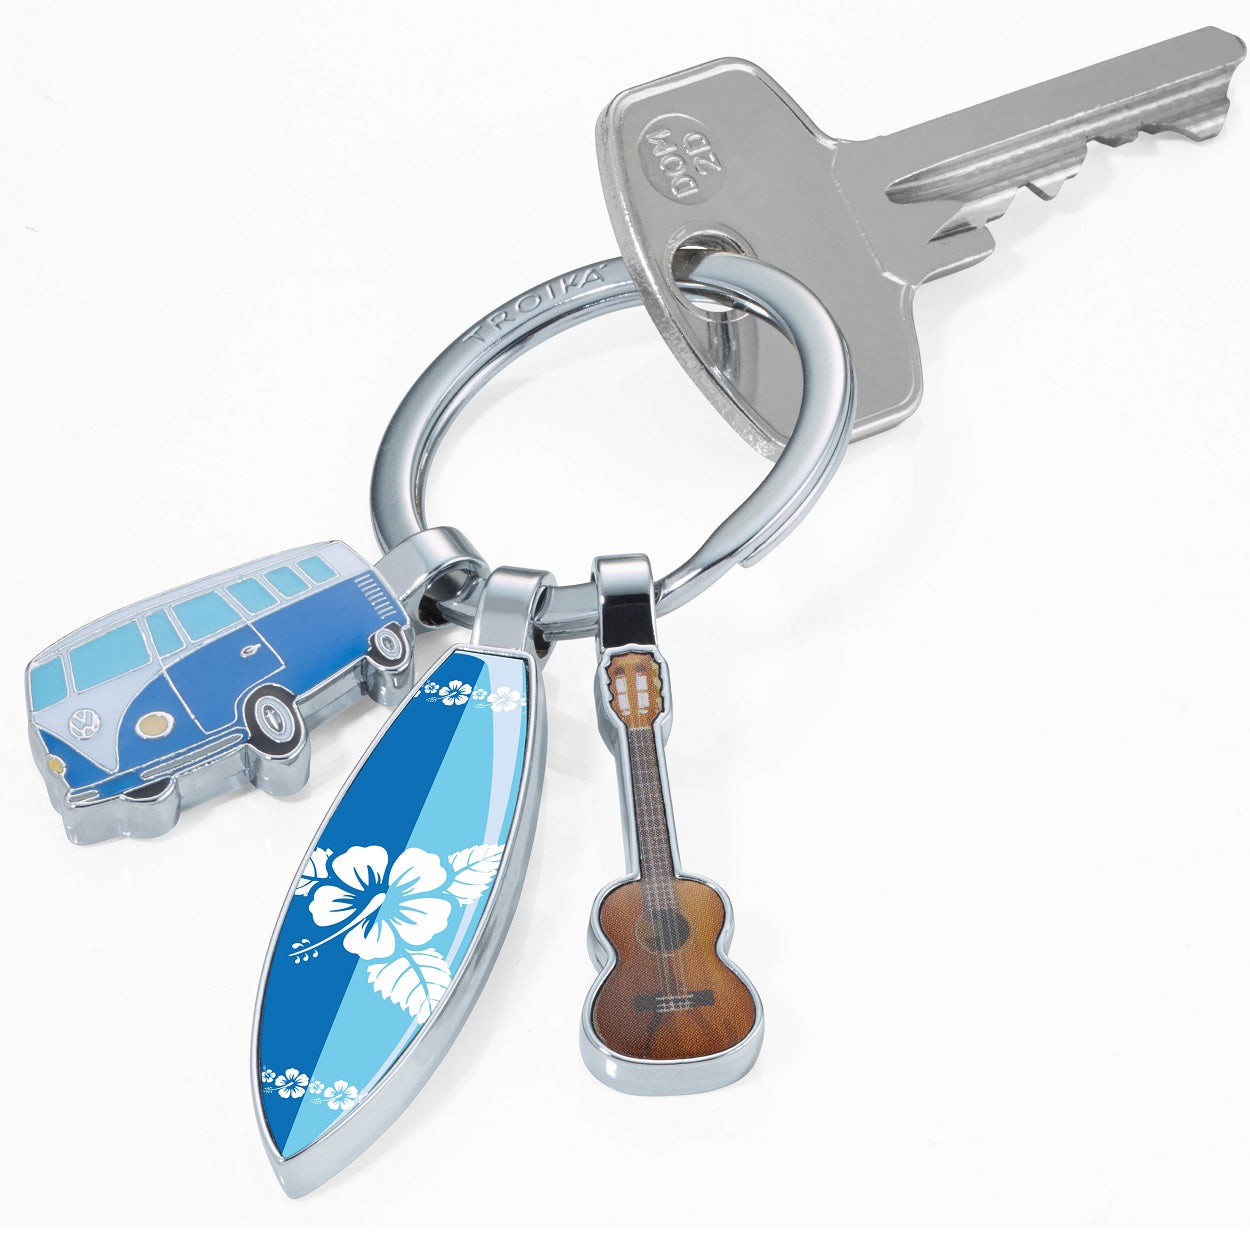 TROIKA Keyring with 3 Charms VW SURFMATE T1 COMBI